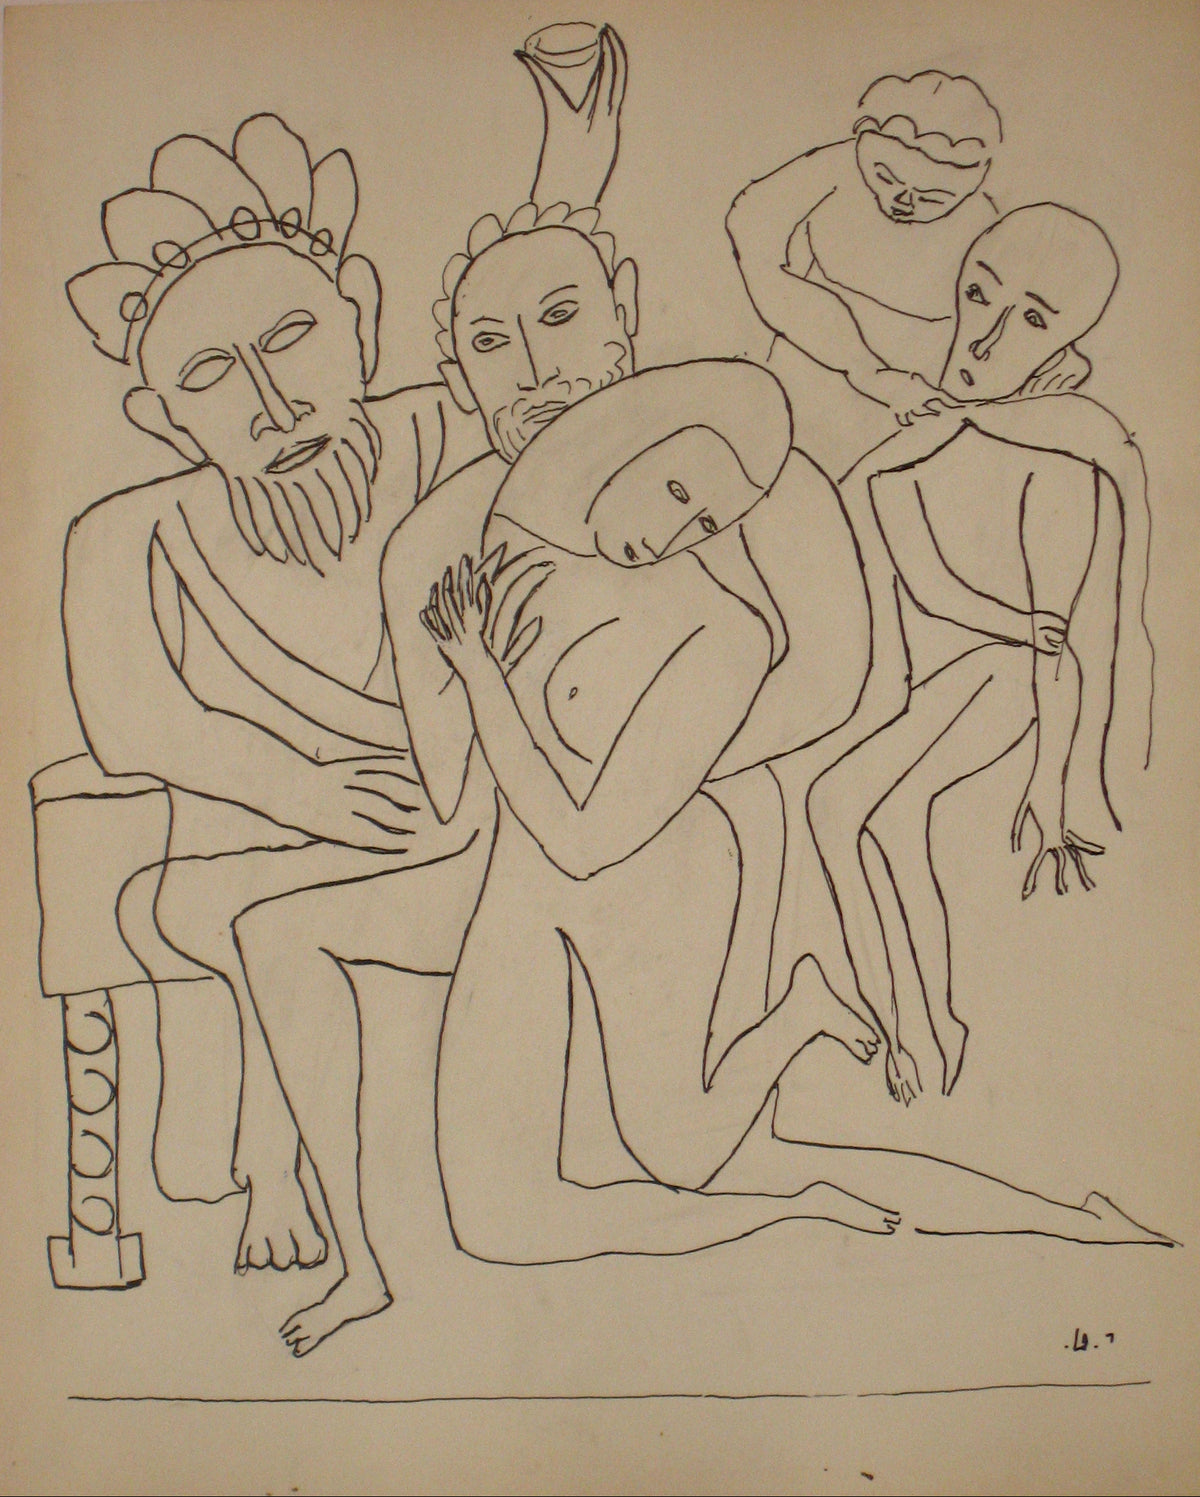 Interconnected Figures &lt;br&gt;Early to Mid 20th Century Ink on Paper &lt;br&gt;&lt;br&gt;#14198